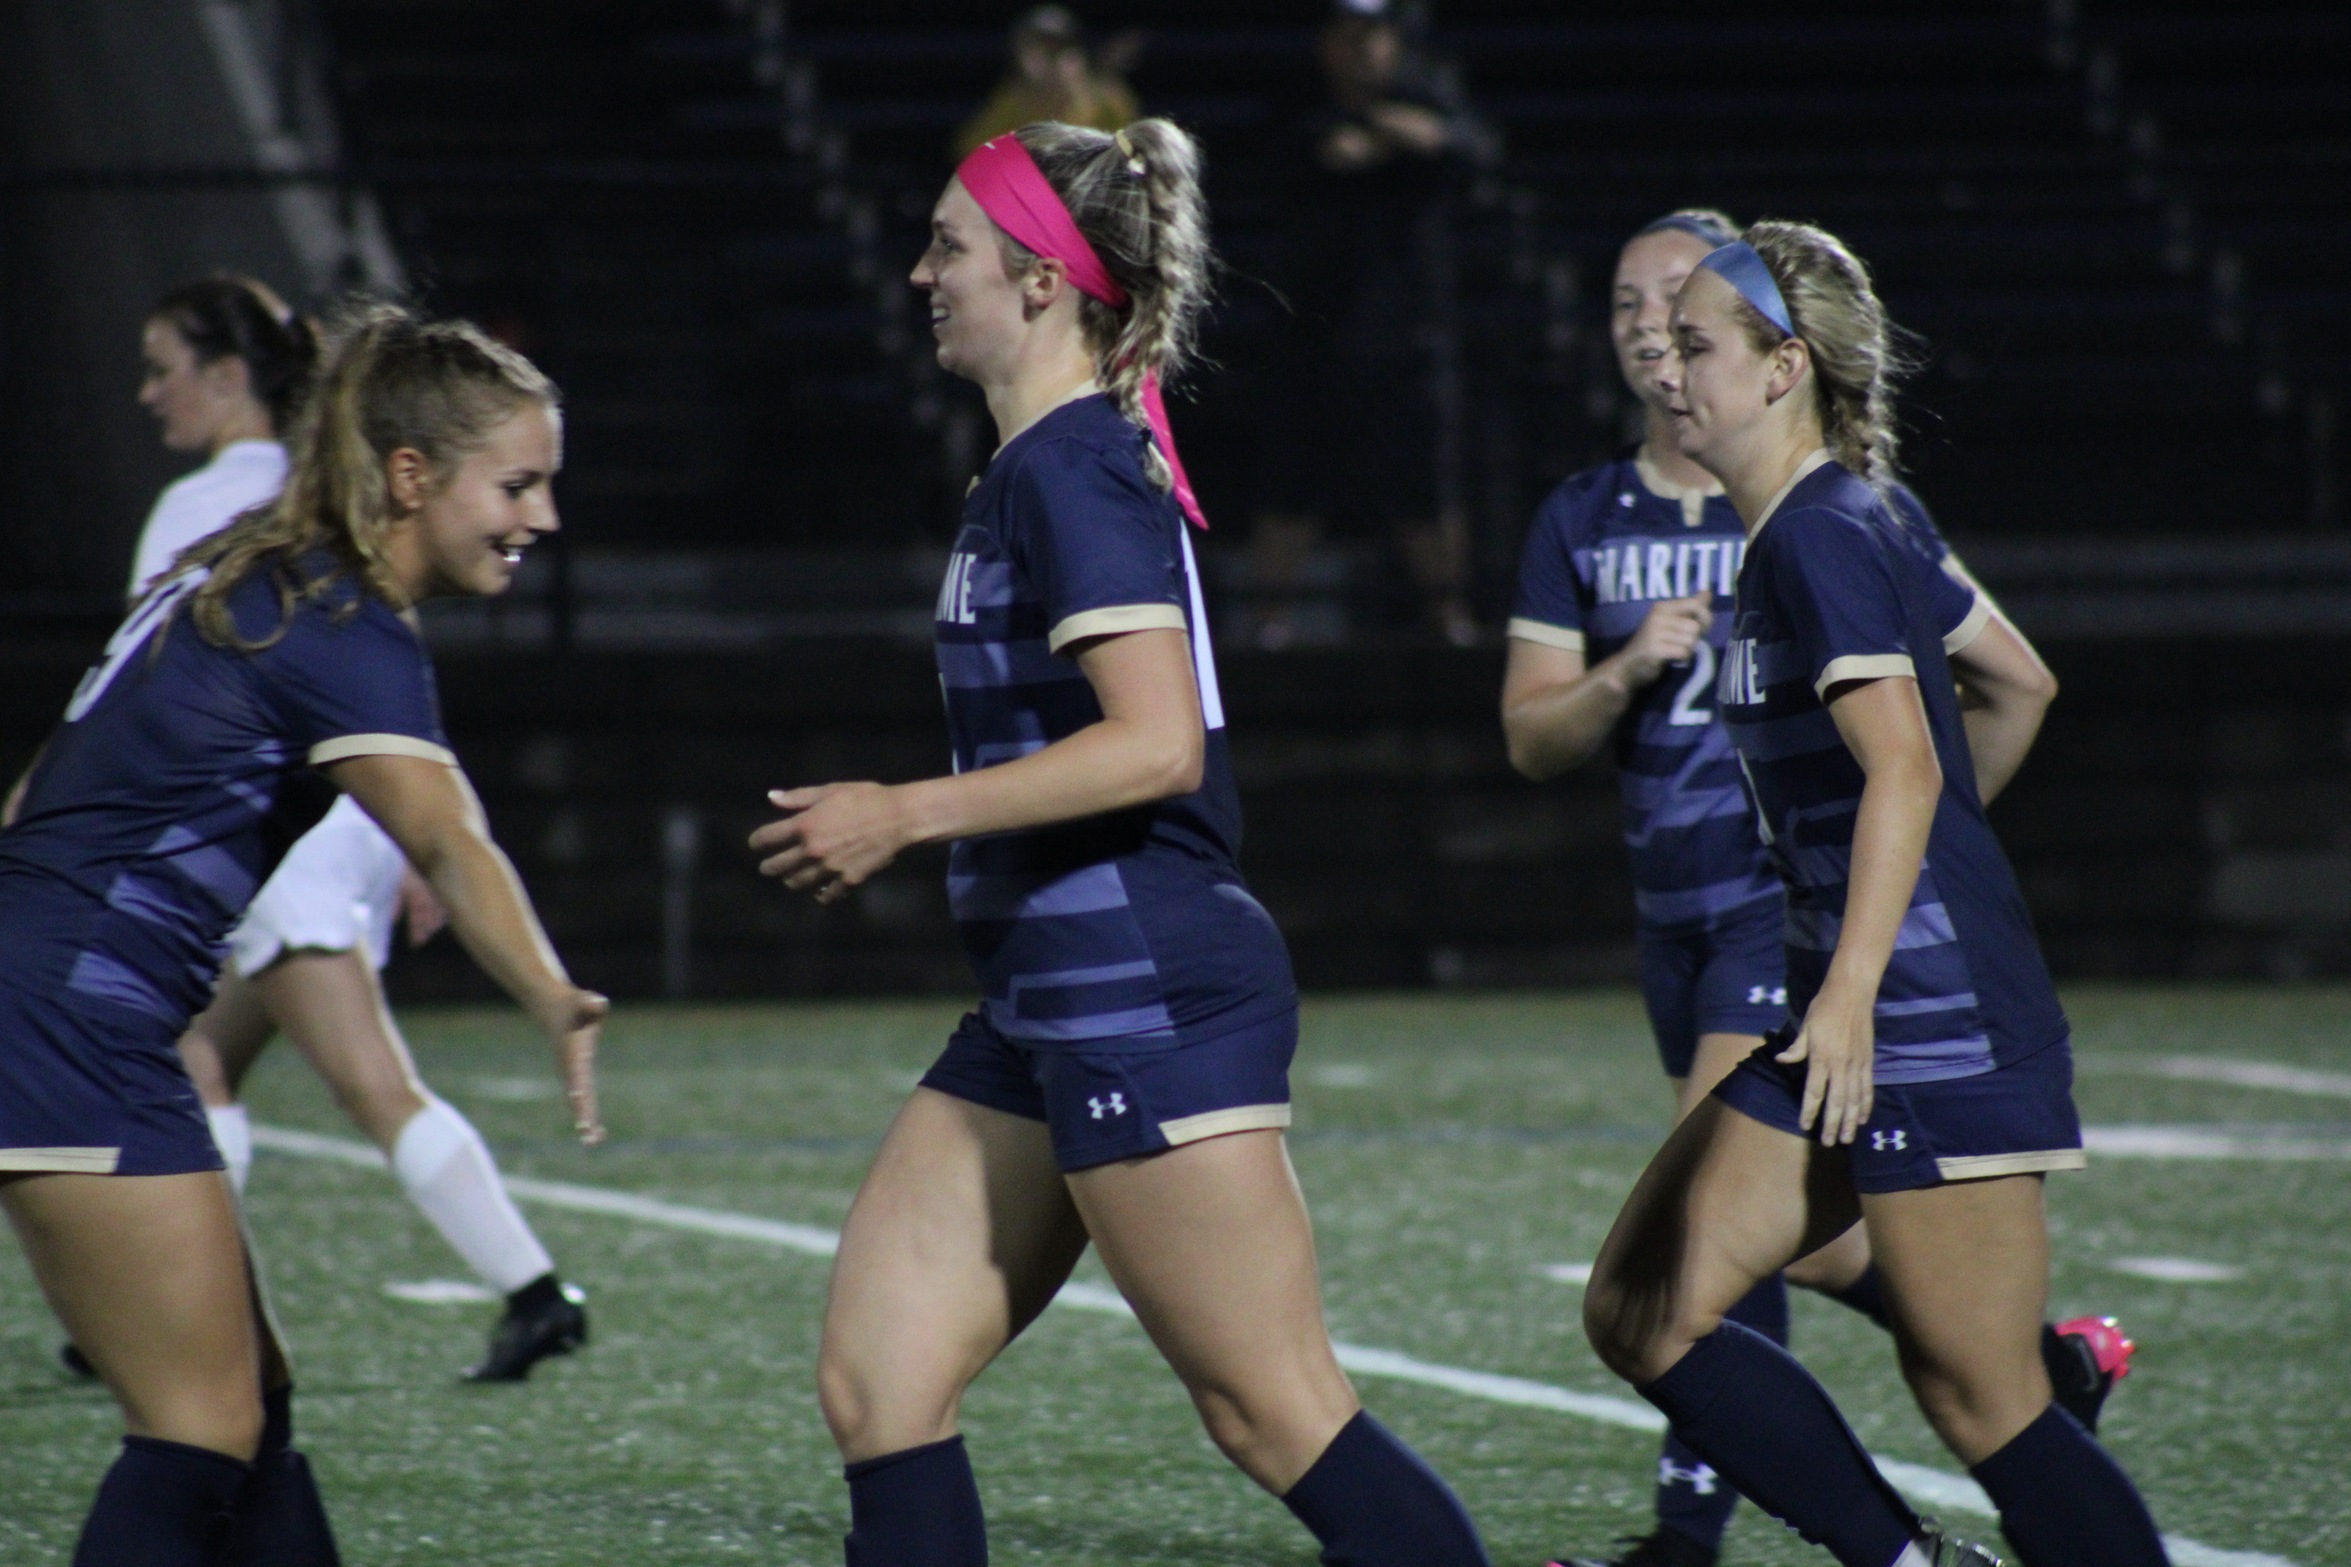 Bucs Tame Lions in Clean Sheet Win on the Road